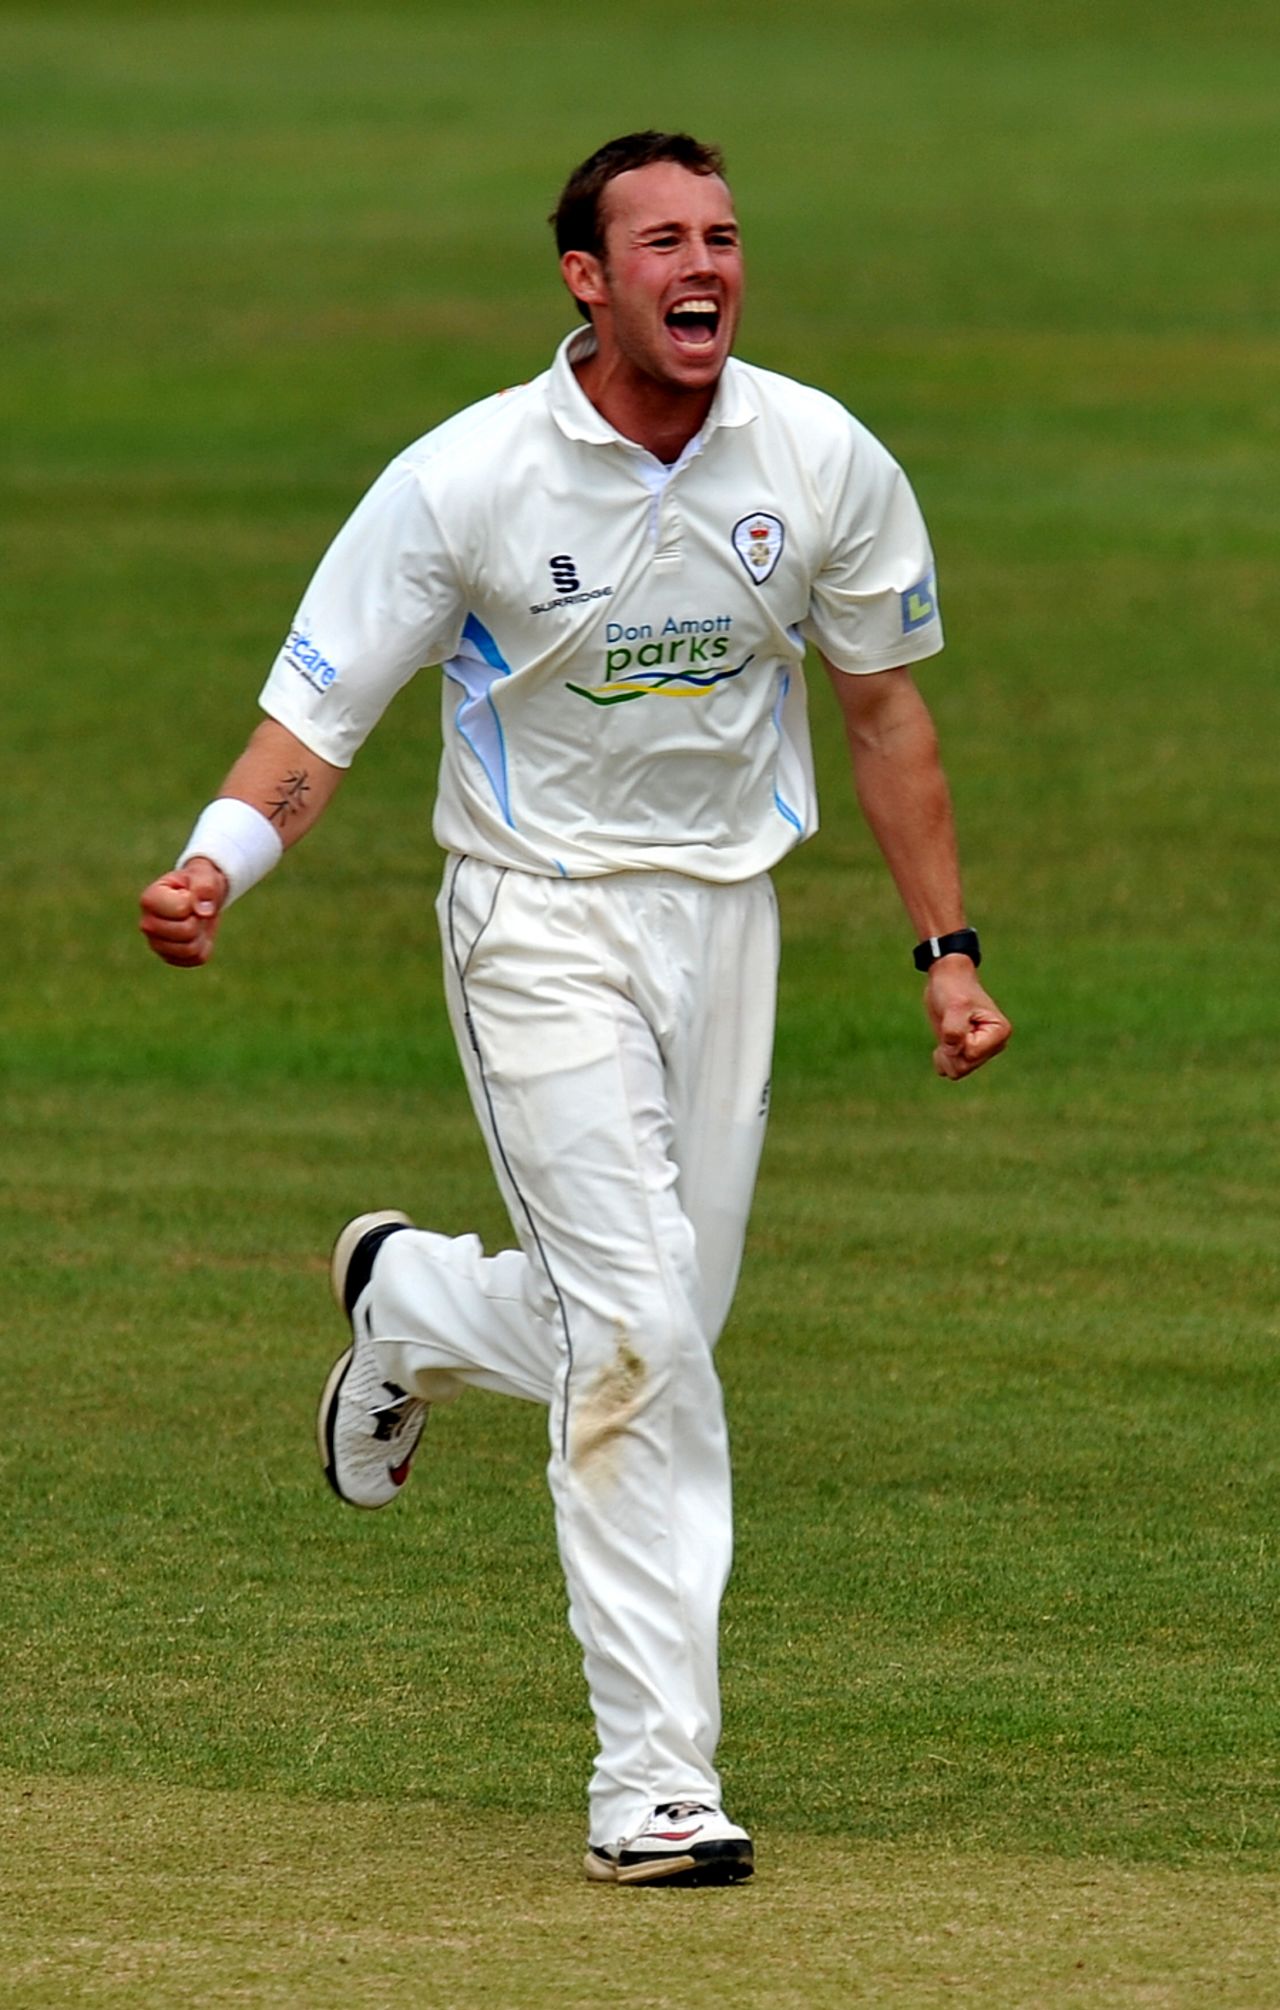 Tony Palladino bowled Derbyshire to victory with 5 for 50, Derbyshire v Glamorgan, Derby, 4th day, July 14 2011